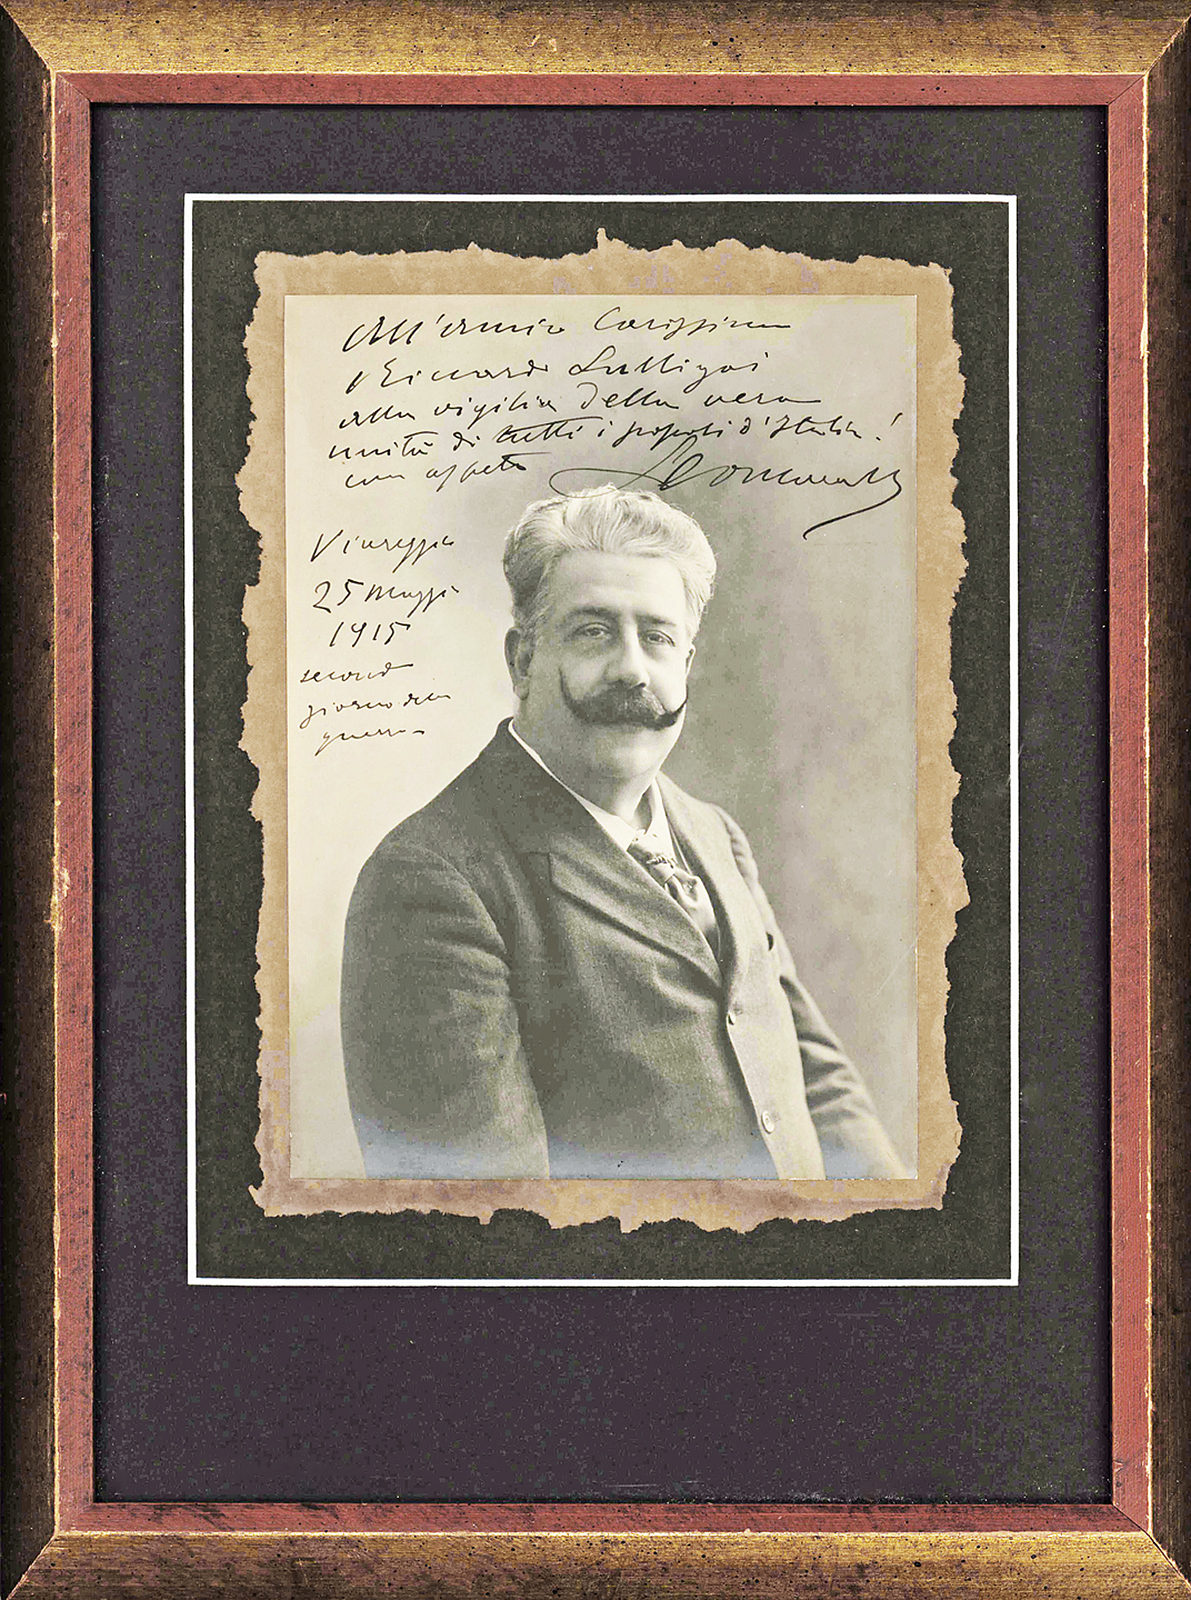 Inscribed Photograph by the Italian composer of “Pagliacci” with Patriotic World War I Sentiment on the “second day of the war”